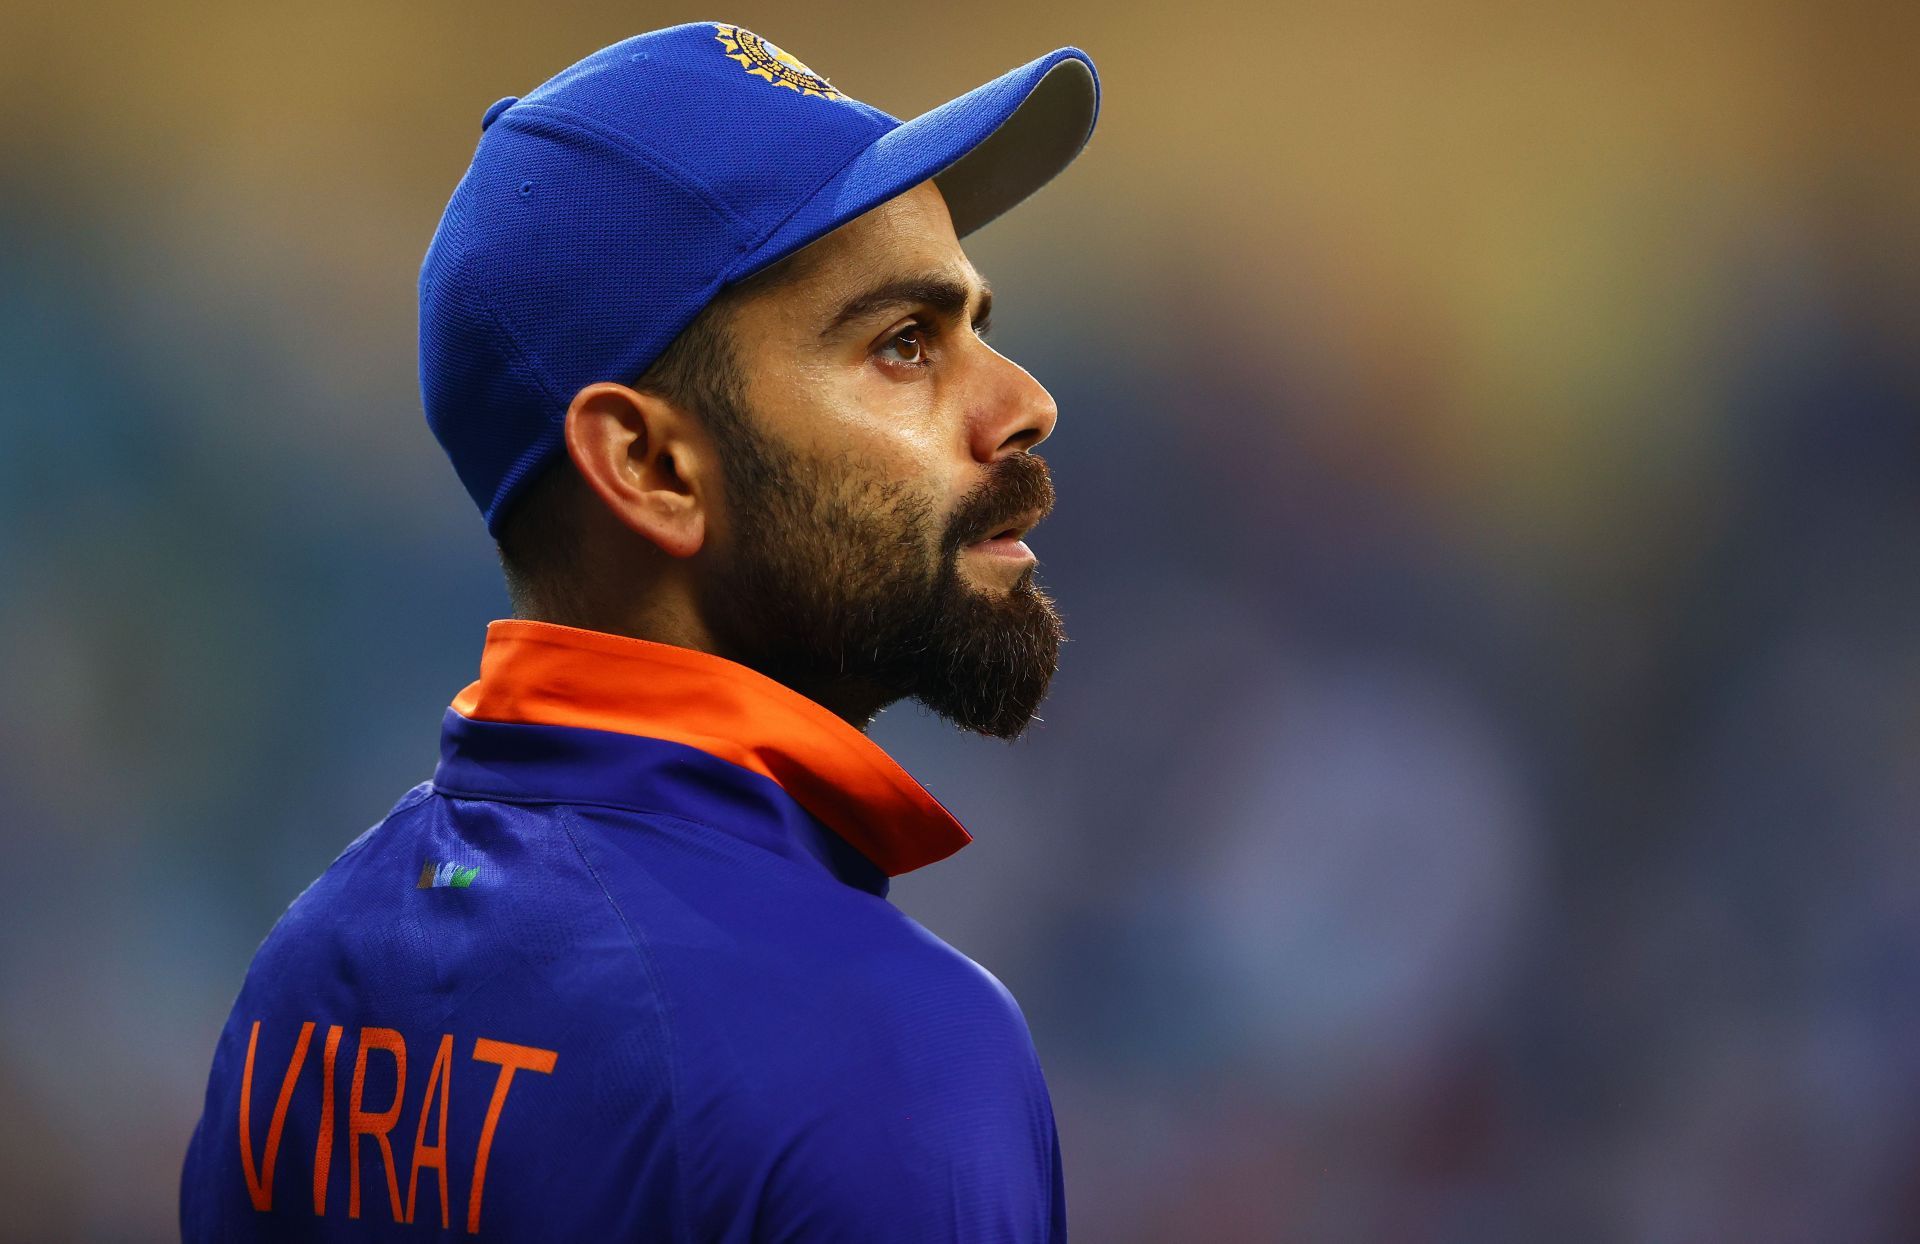 Virat Kohli has some stupendous records to his name over the 14 years that he has played for India so far. (P.C.:Getty)